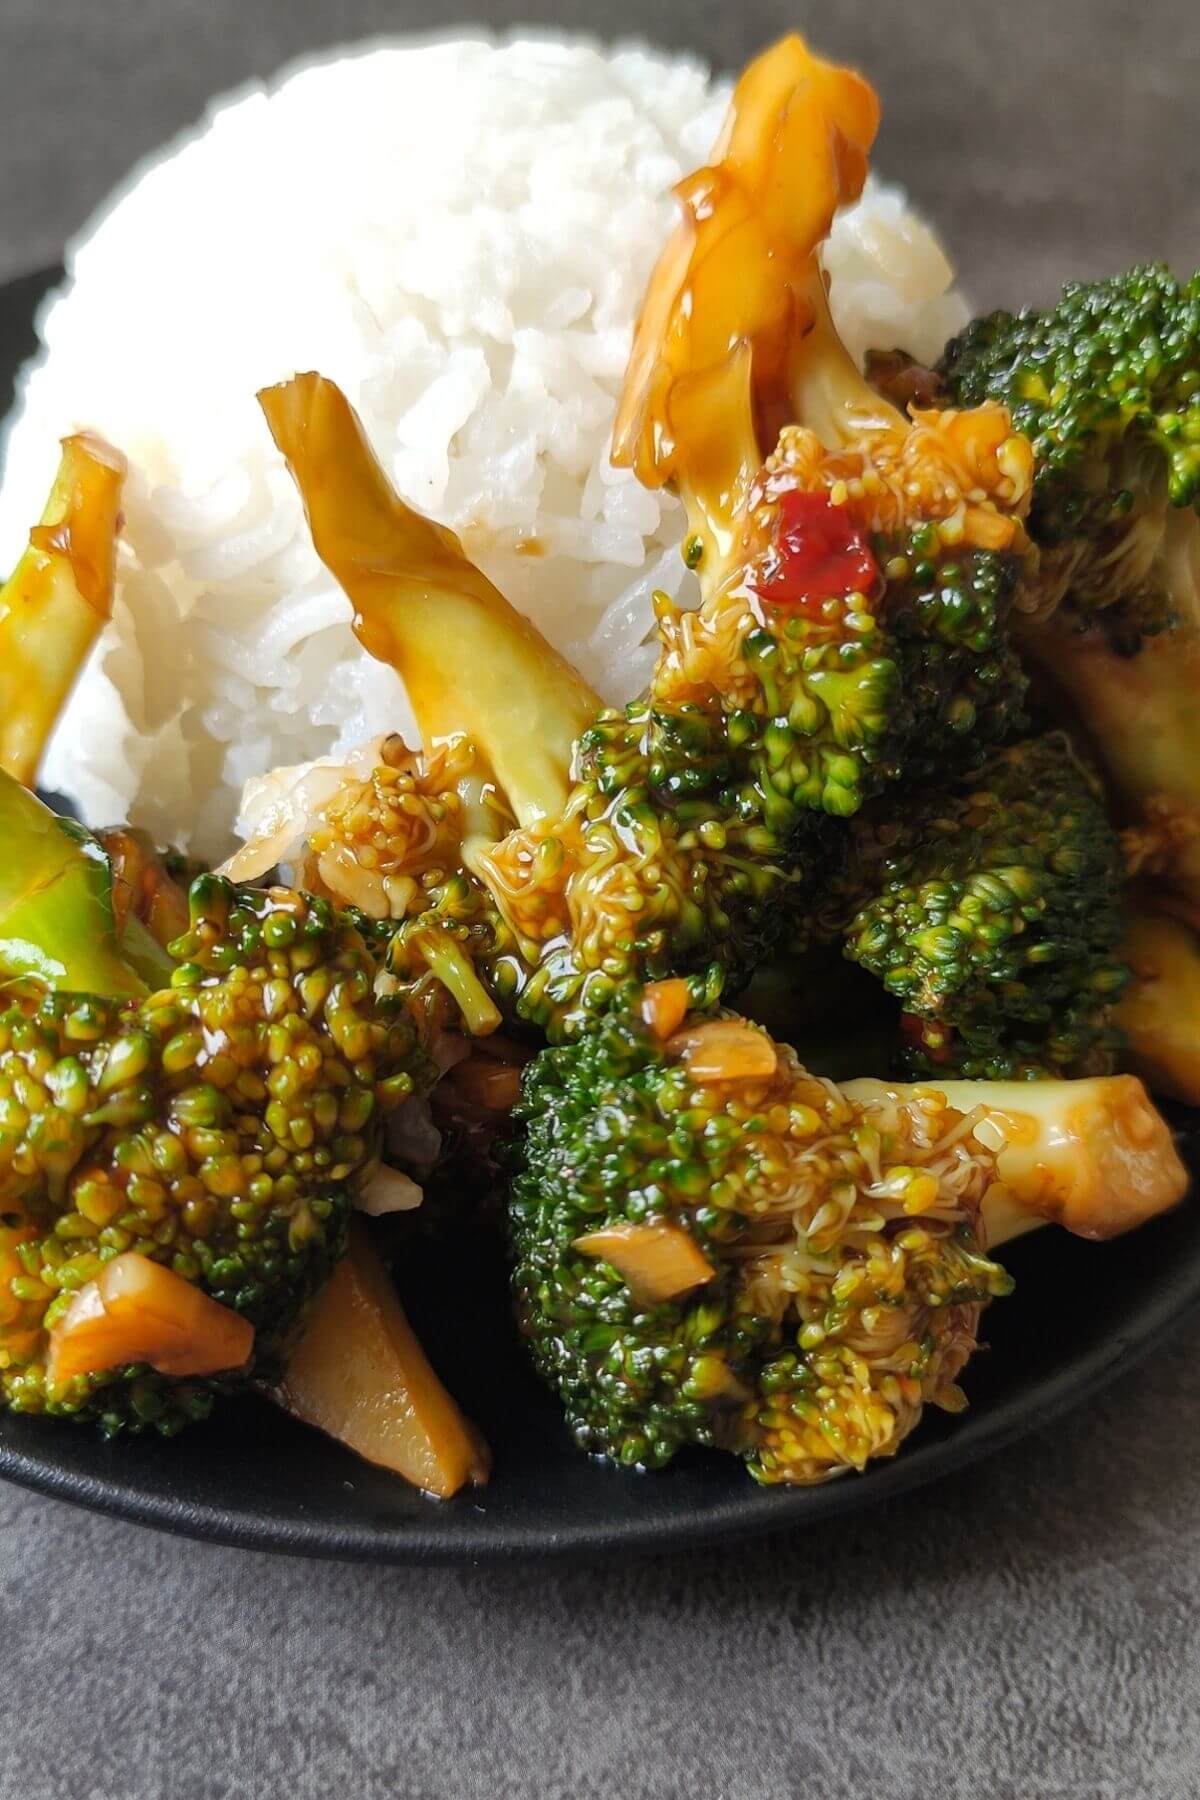 Asian style broccoli in ginger garlic sauce served with rice on a black plate